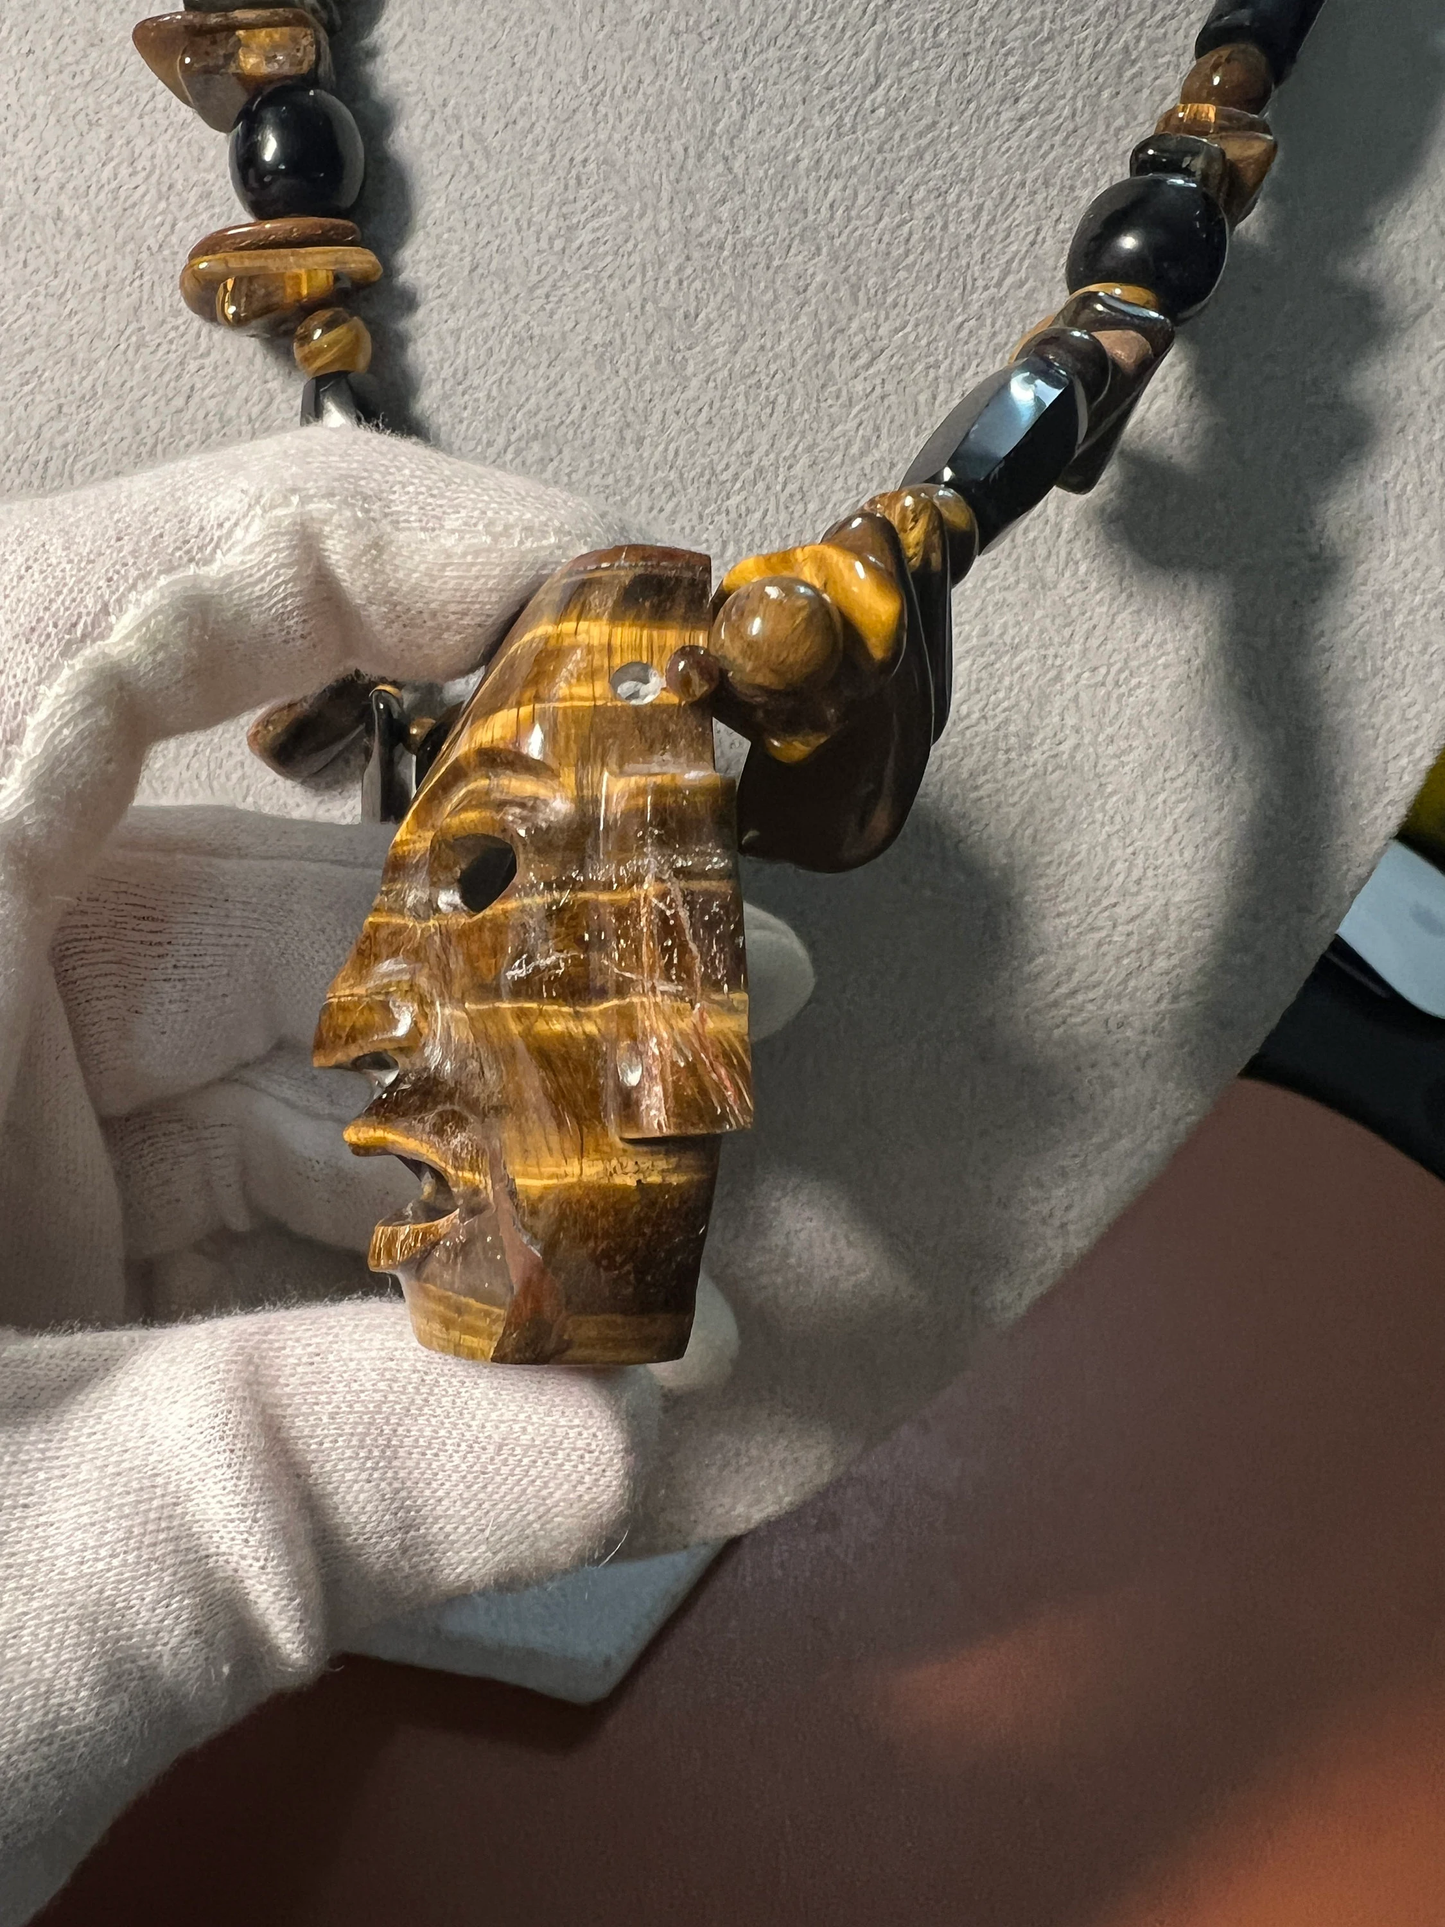 Large Teotihuacan Face Mask Tiger Eye Stone Pendant Necklace, 20", Obsidian Beads, Handmade, Ritual Necklace Rare, Golden, Aztec, Maya (#15)